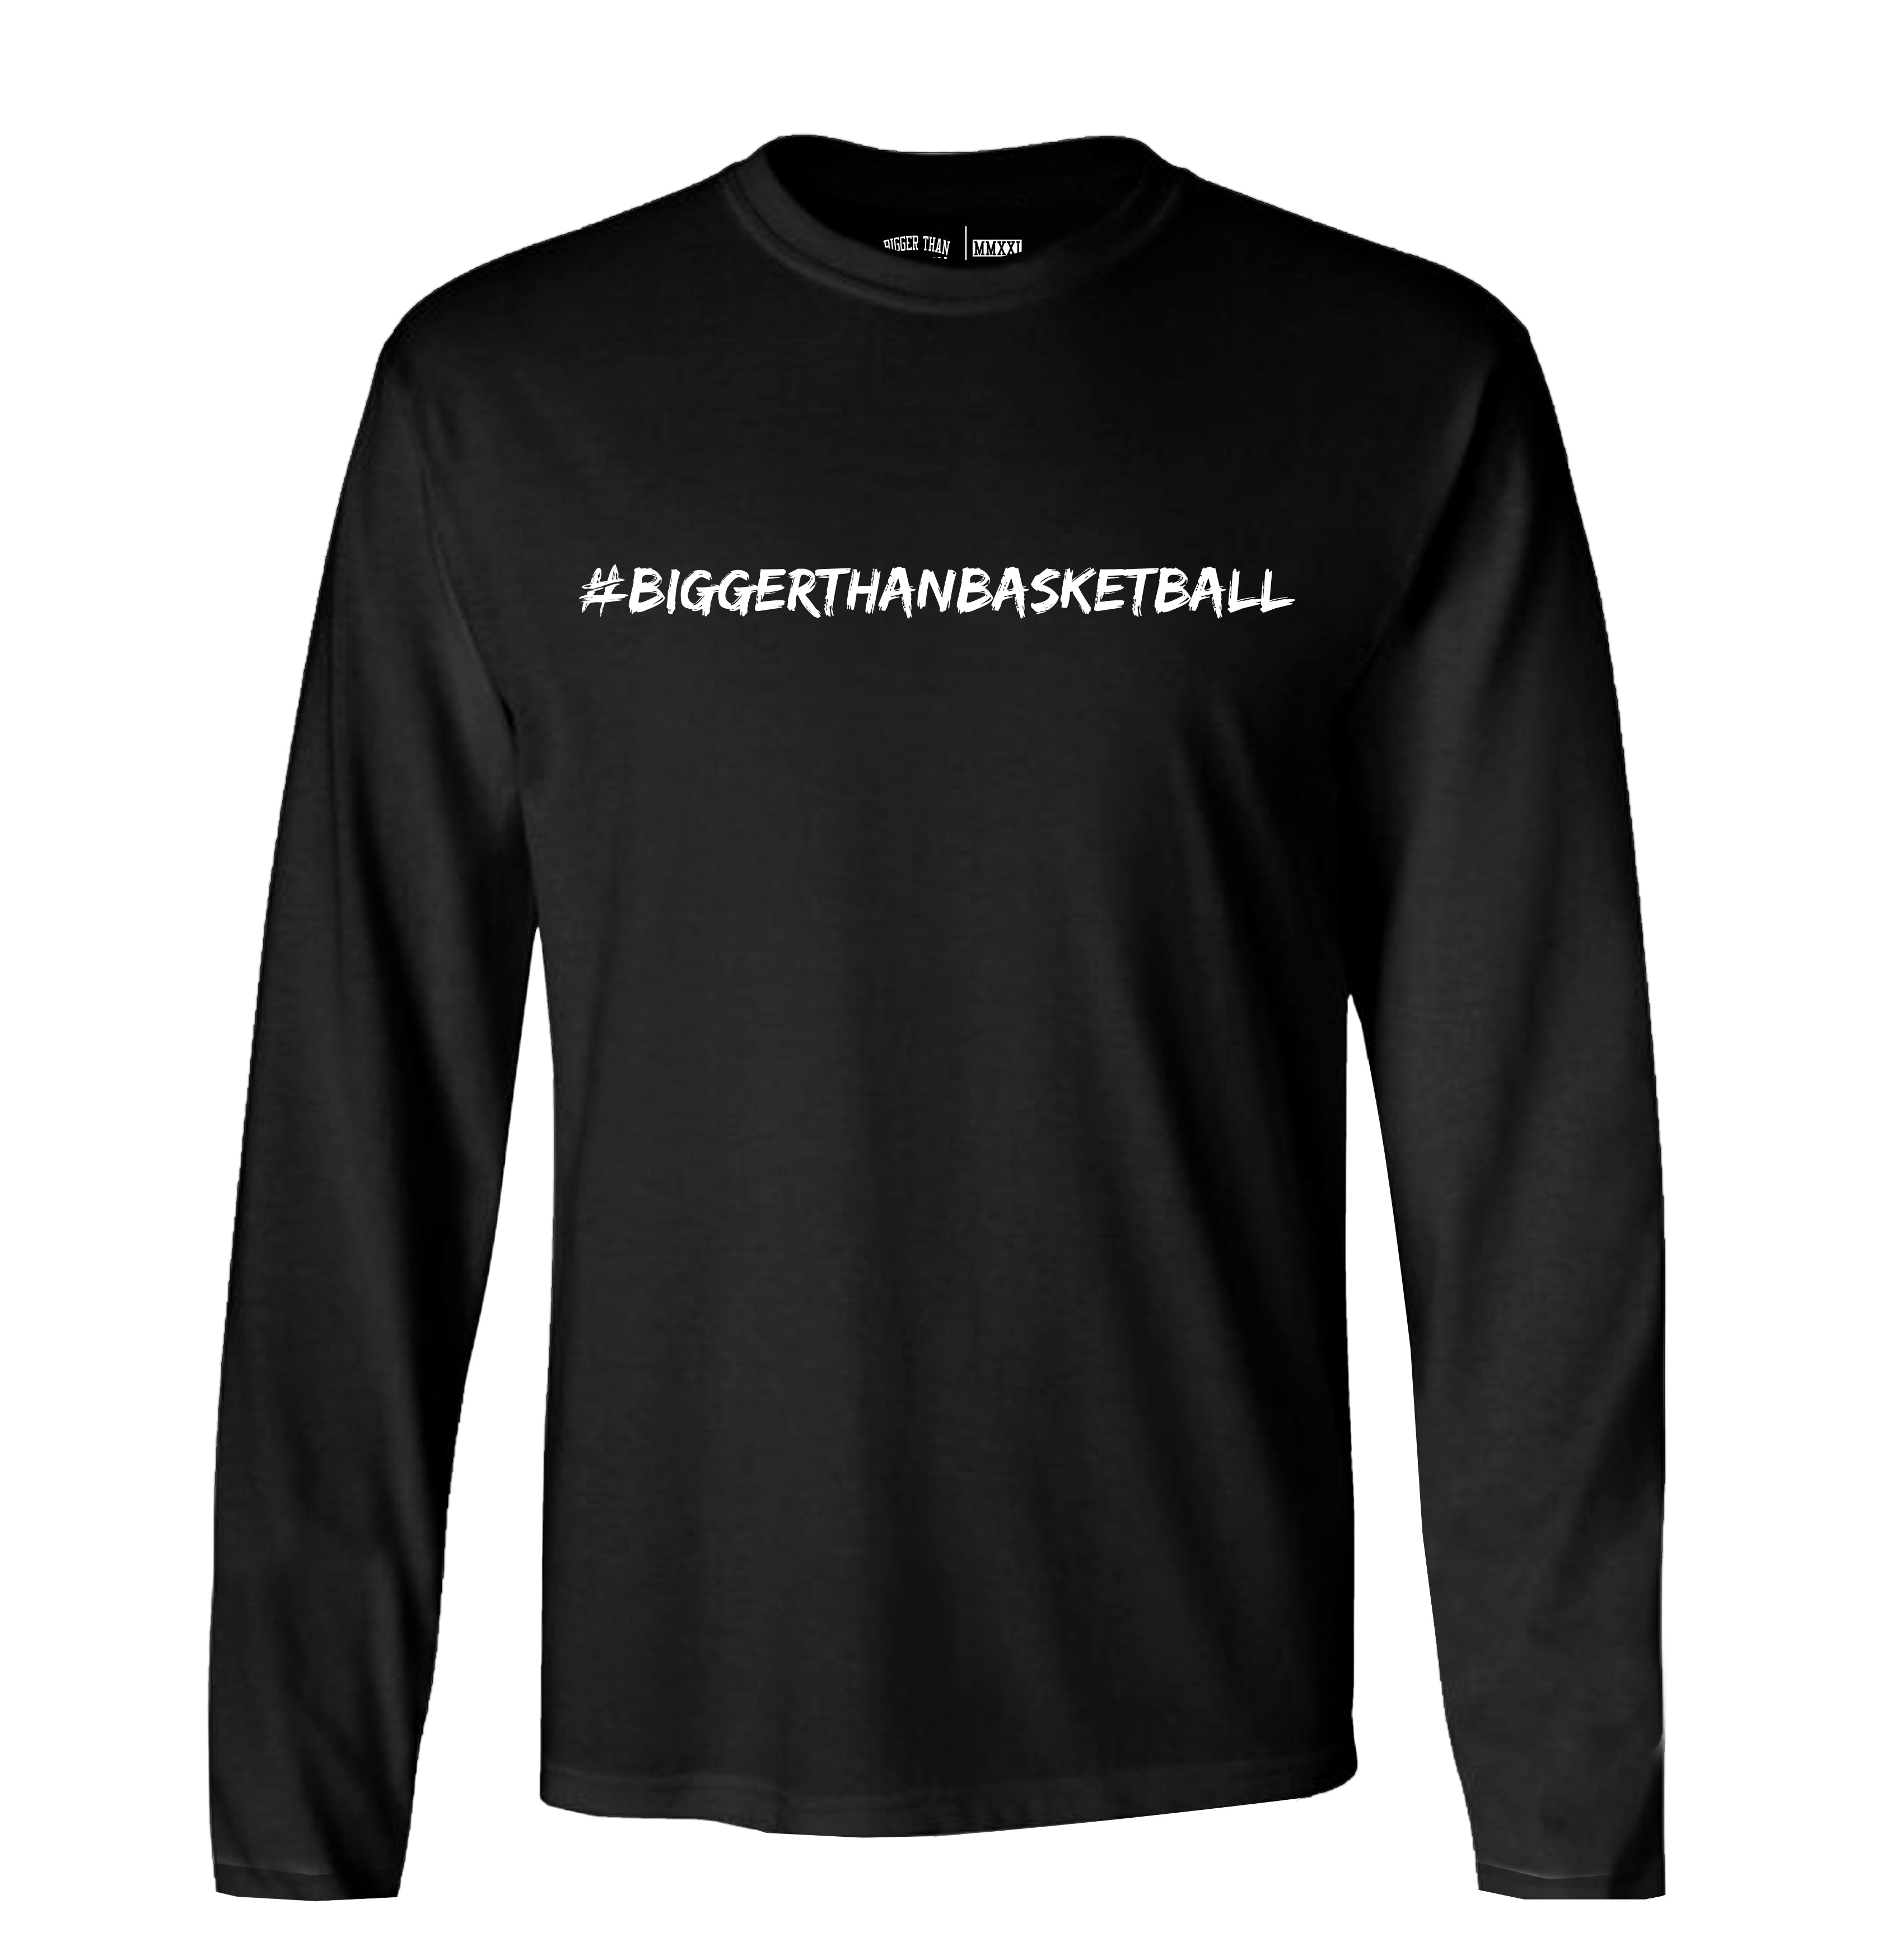 More Than A Game - Long Sleeve - Black